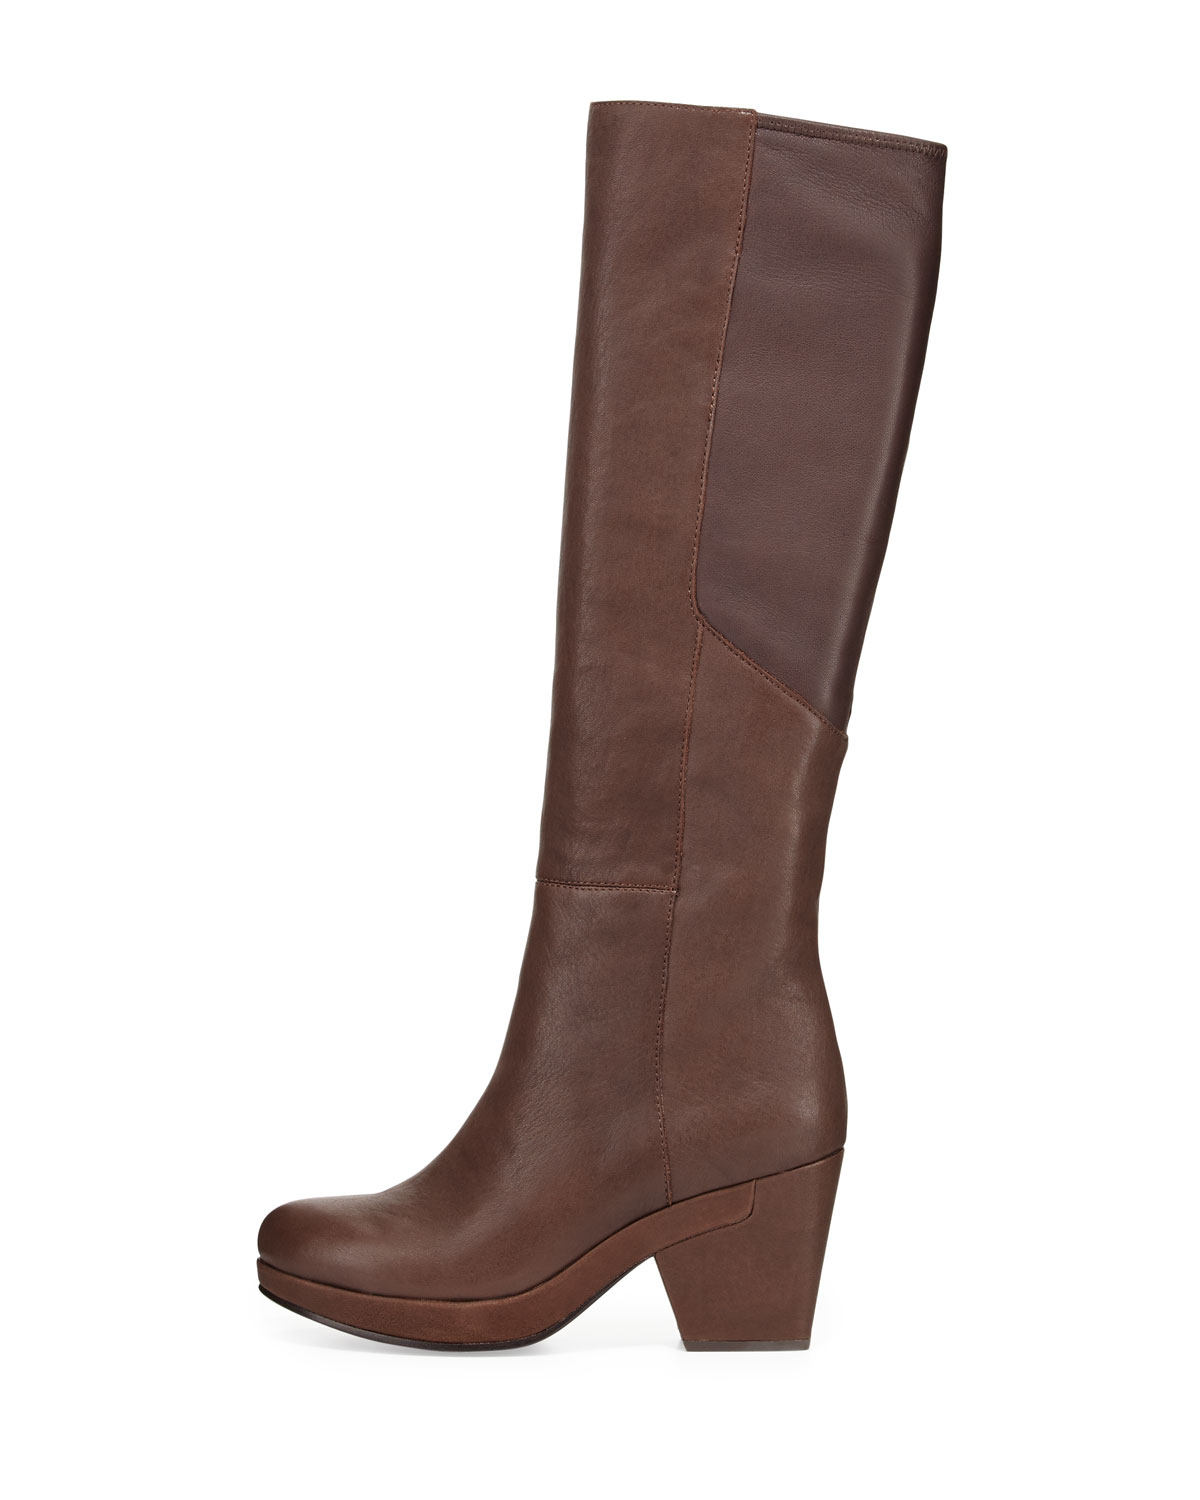 Lyst Eileen Fisher Ivy Leather Knee Boot in Brown